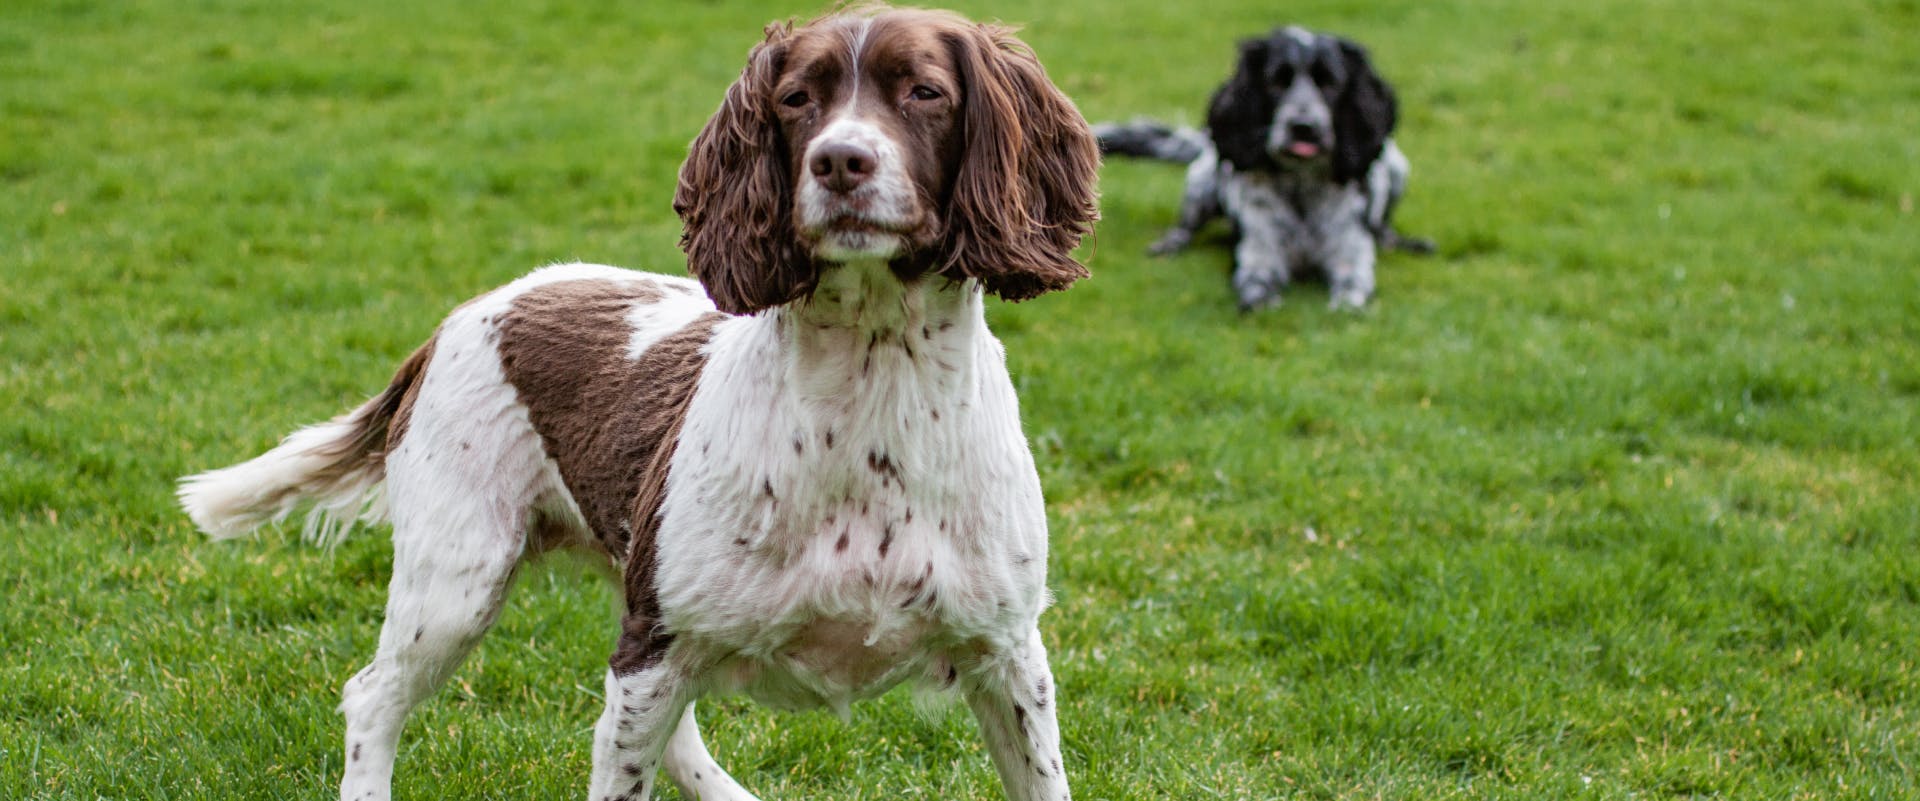 two spaniels waiting on a patch of grass